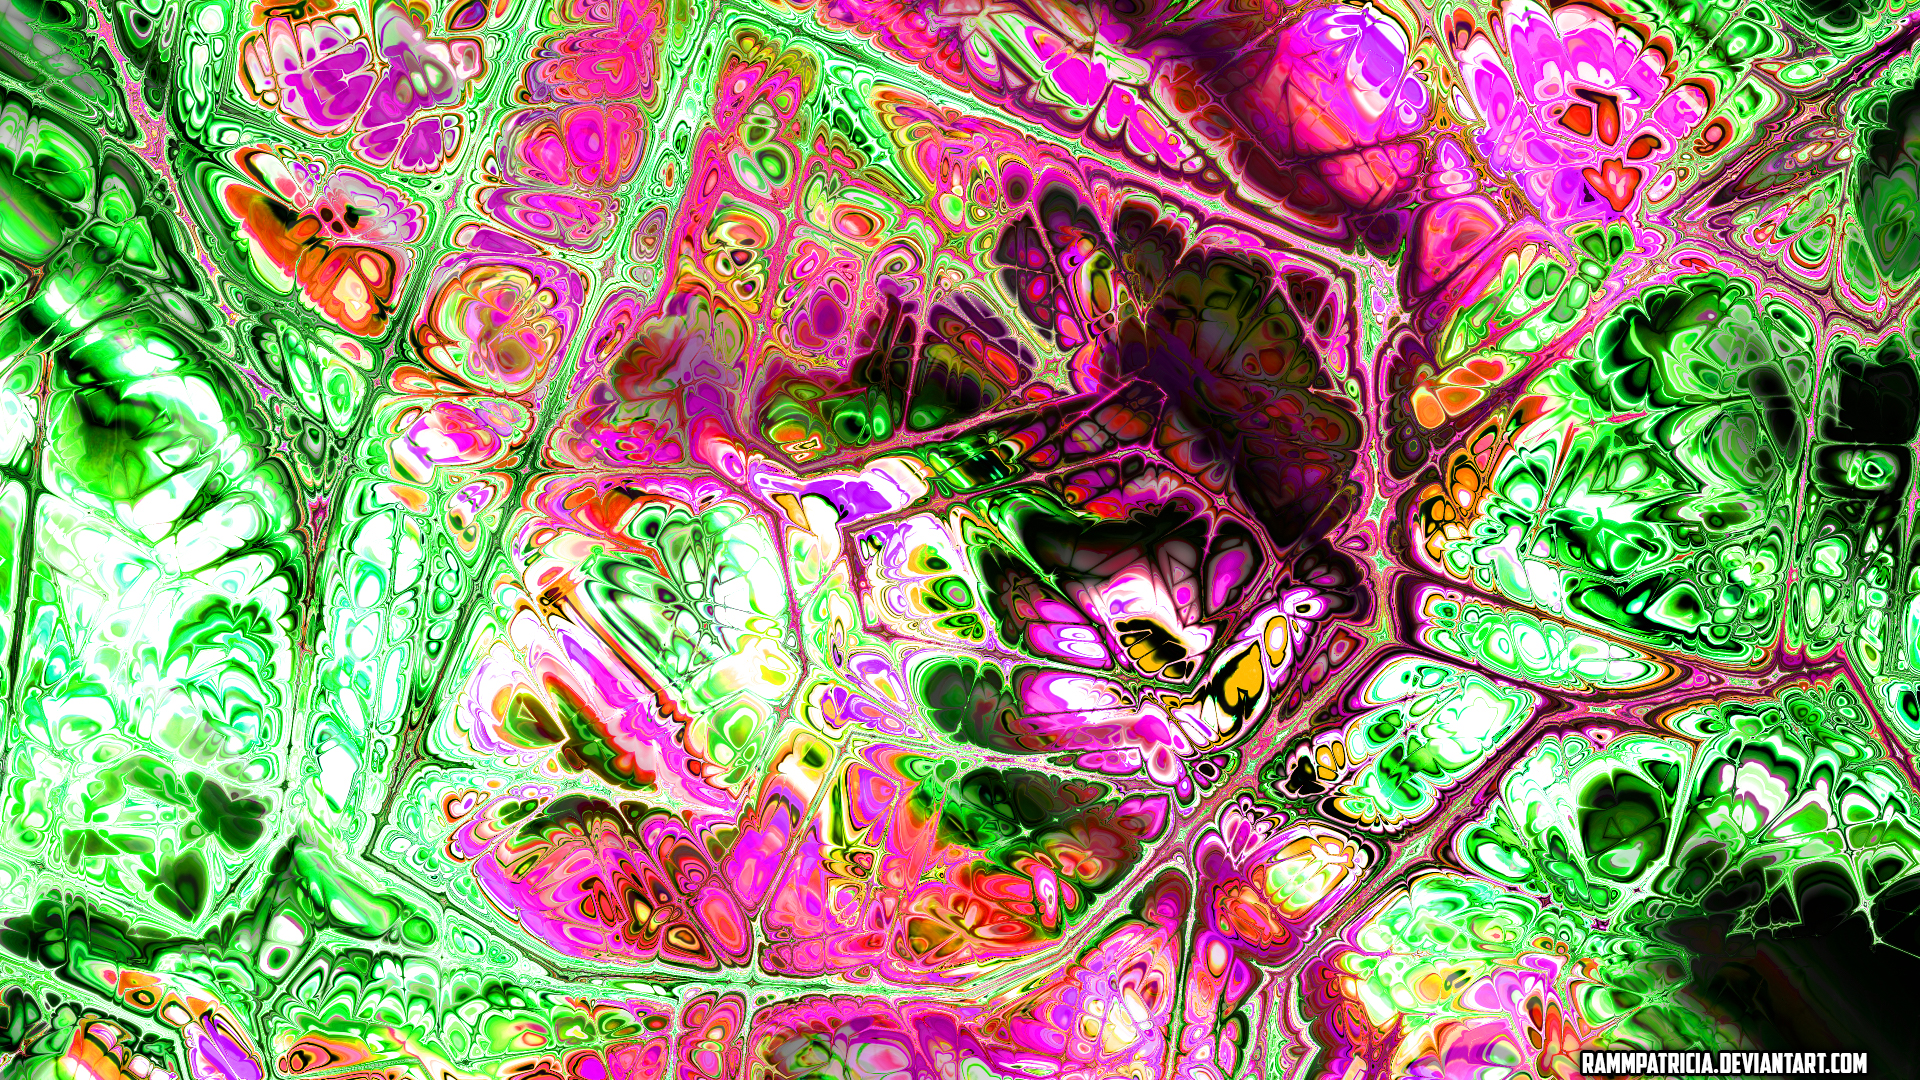 Digital RammPatricia Digital Art Abstract Mantis Insect Orchids Watermarked 1920x1080